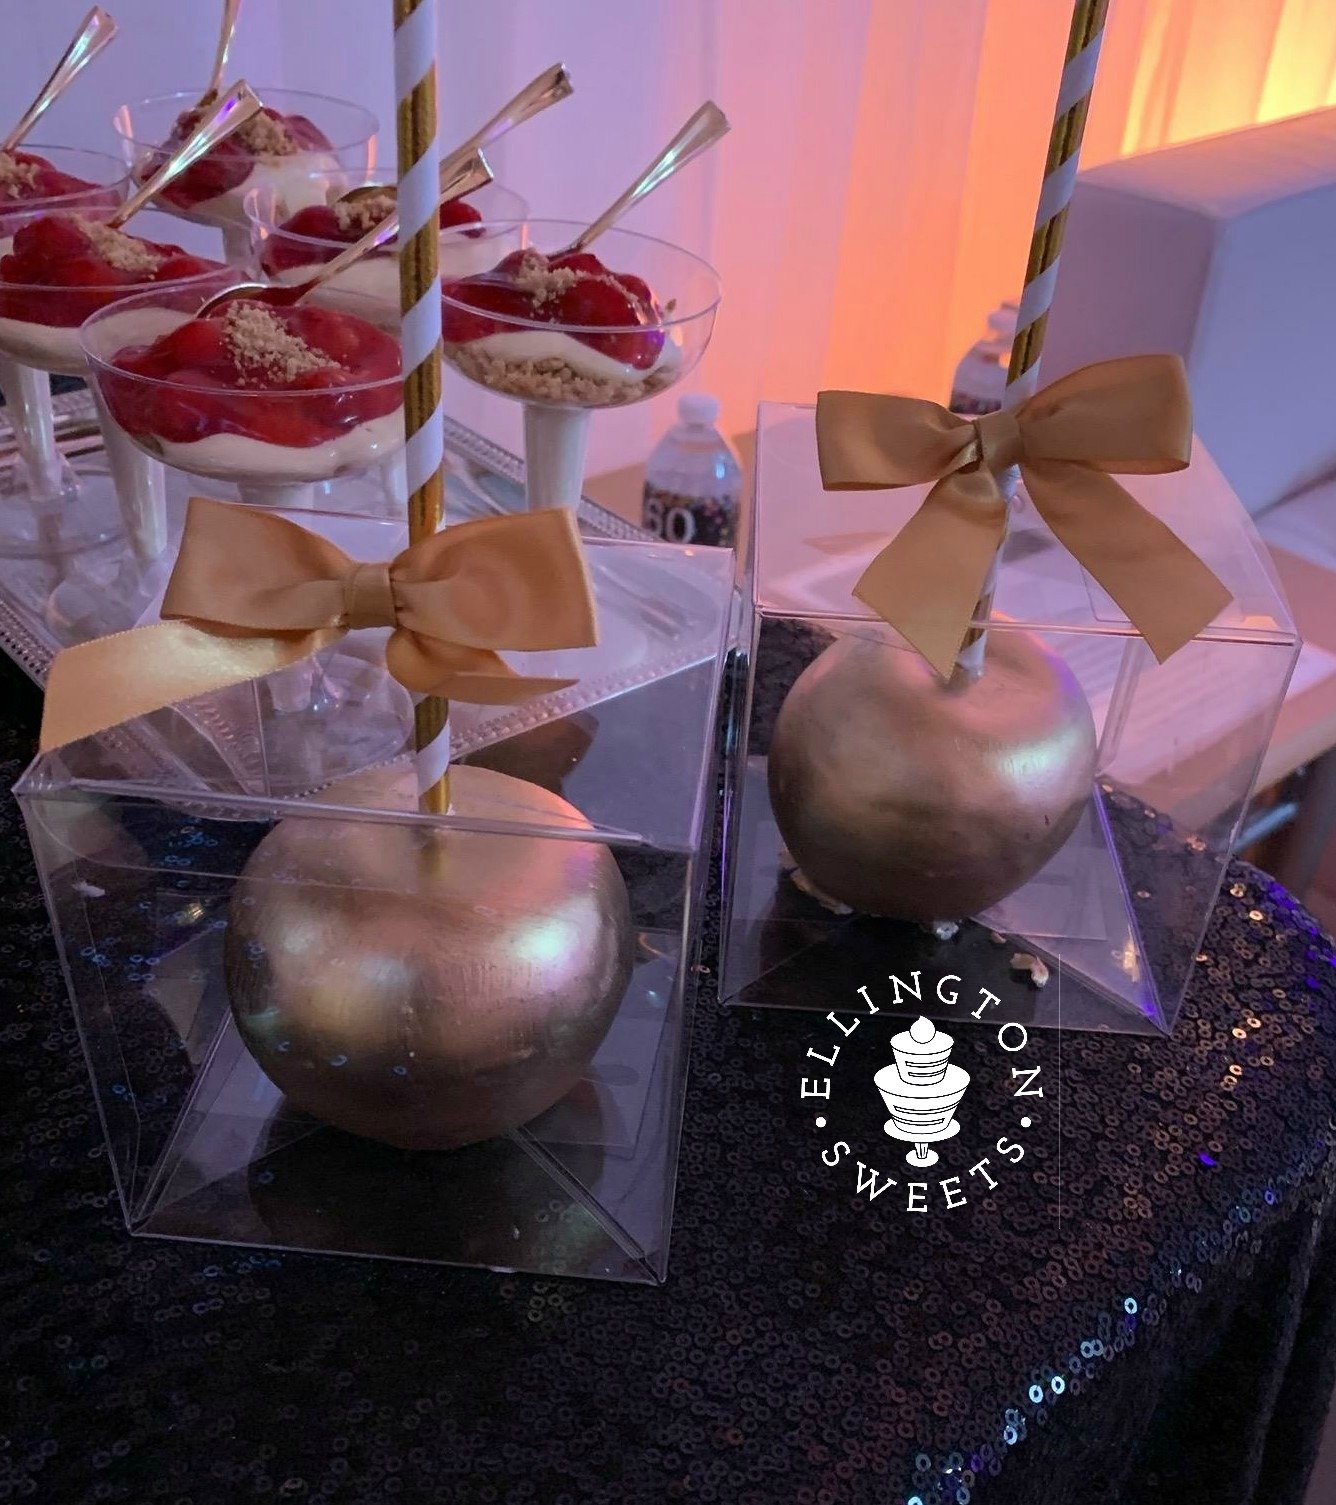 Gold Candy Apples.jpg